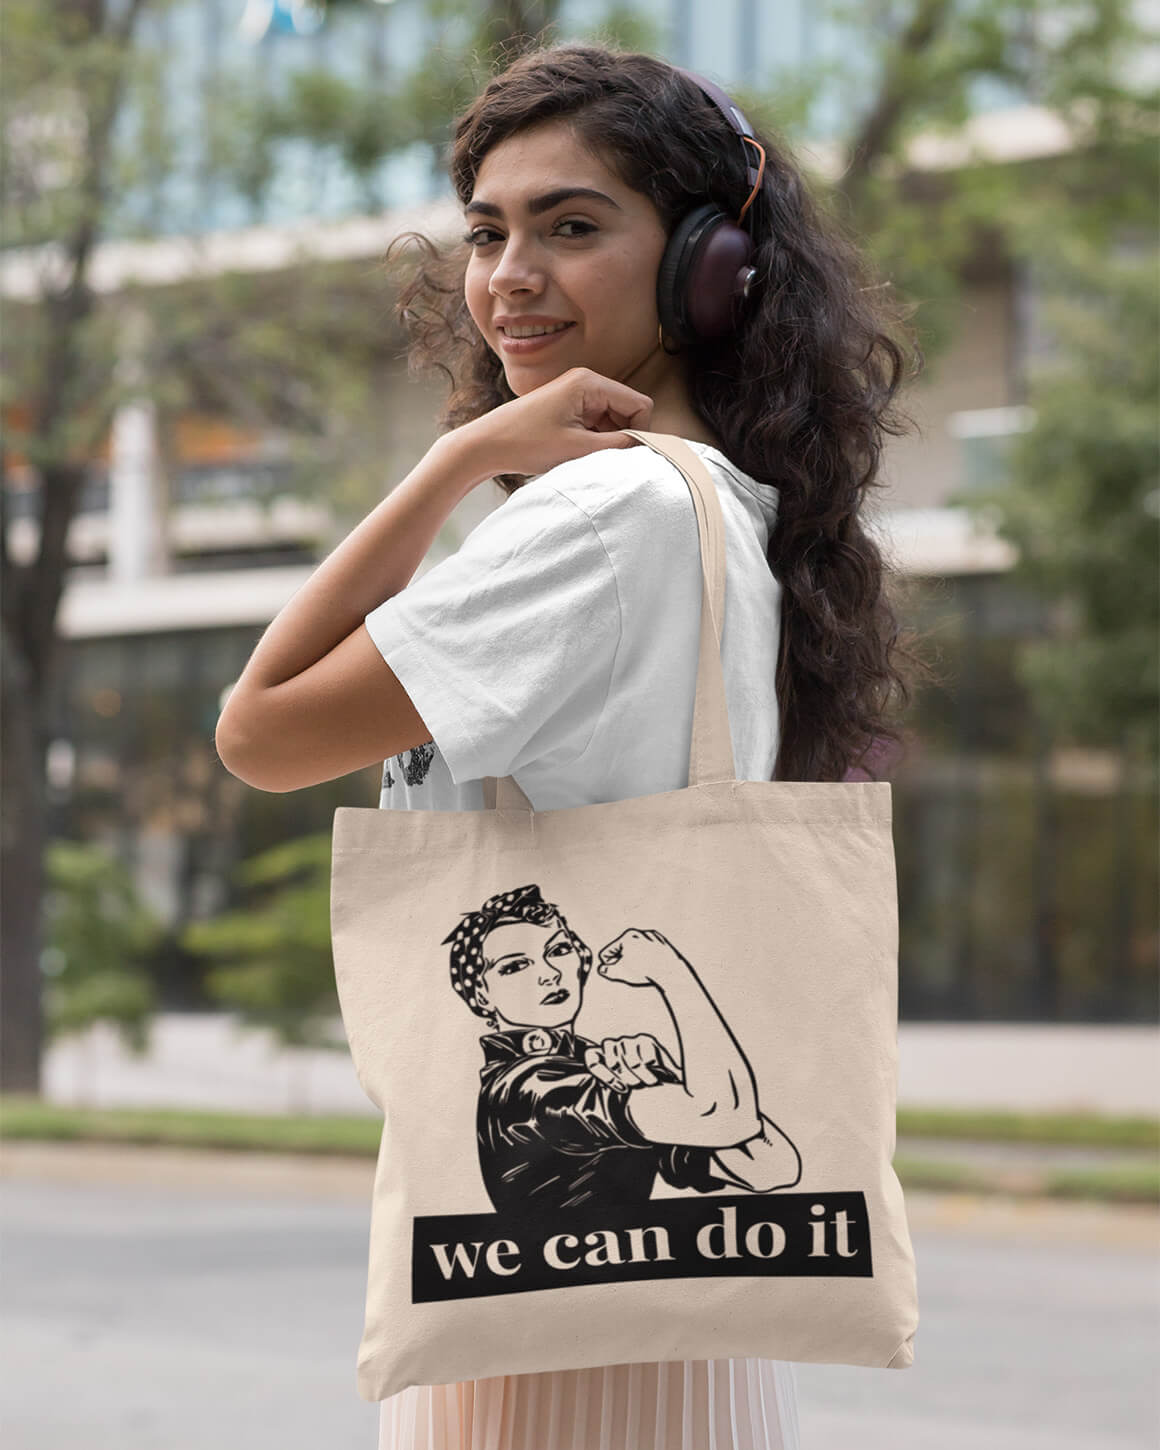 Girl with curly hair and headphones carrying the rosie the riveter feminist tote bag